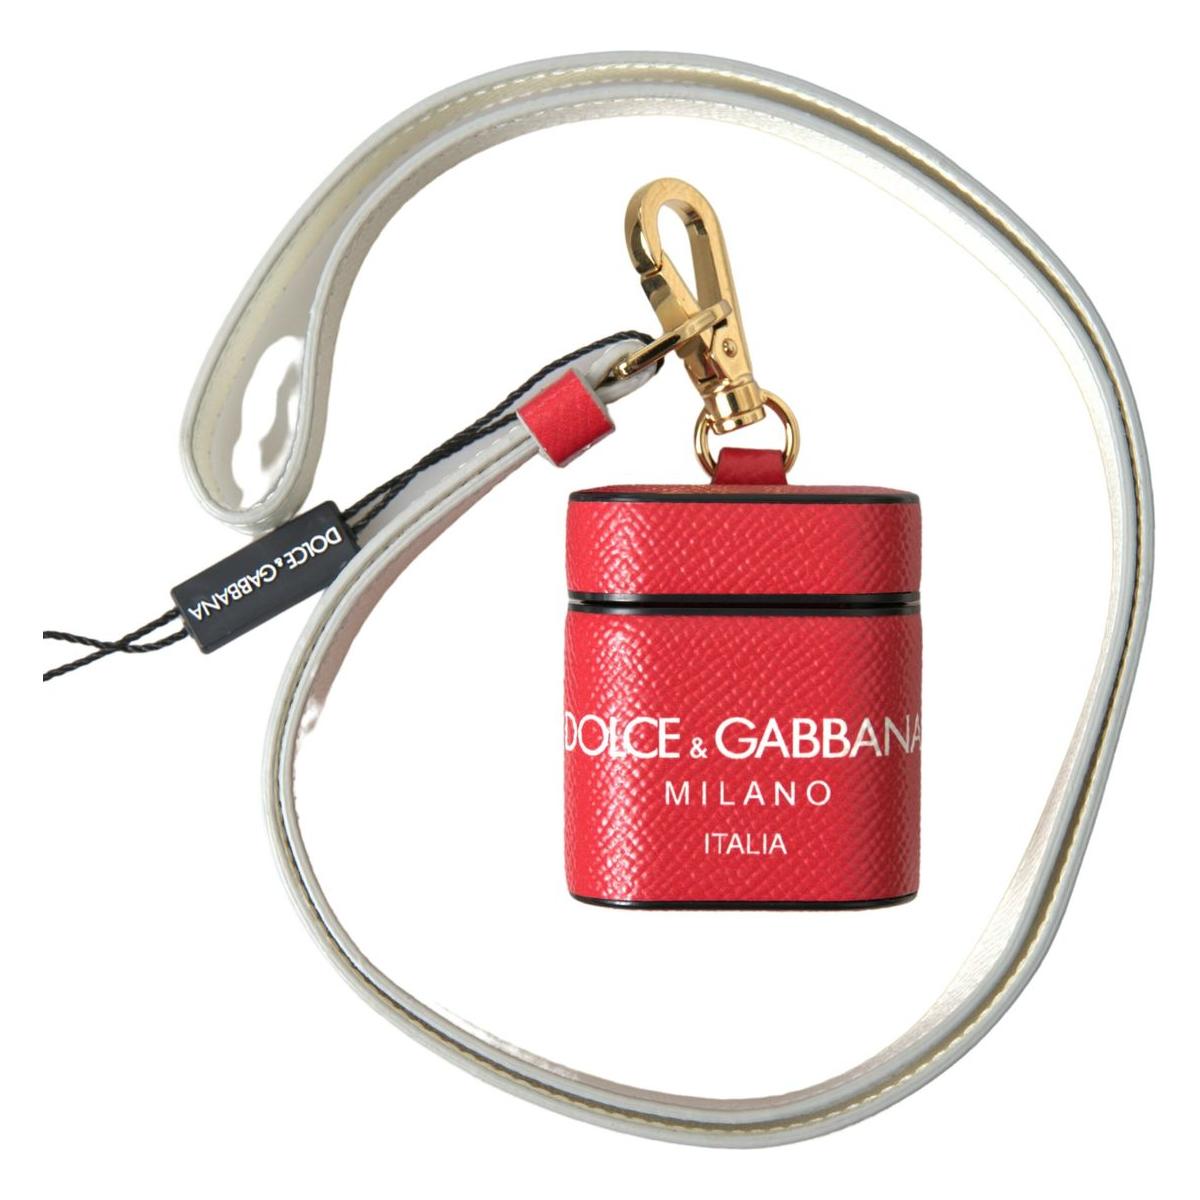 Dolce & Gabbana Elegant Red Leather Airpods Case red-leather-gold-tone-metal-logo-print-airpods-case 465A4902-scaled-7545bc93-298.jpg